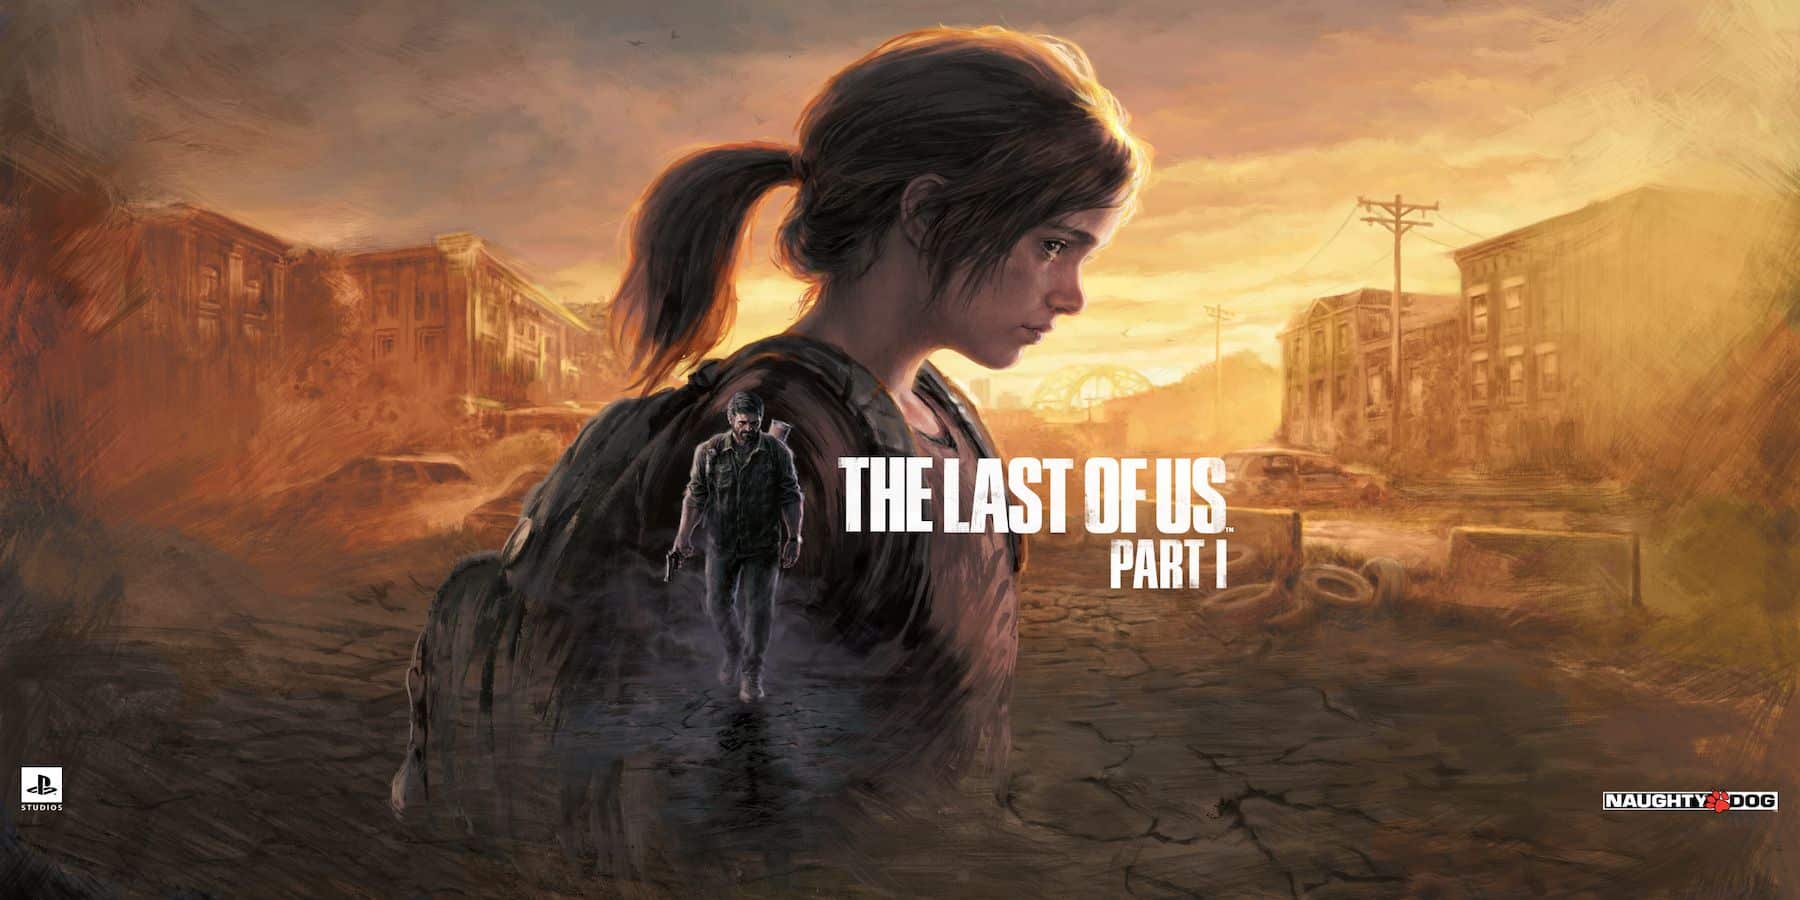 The Last of Us Part II - State of Play shows exciting gameplay - Checkpoint